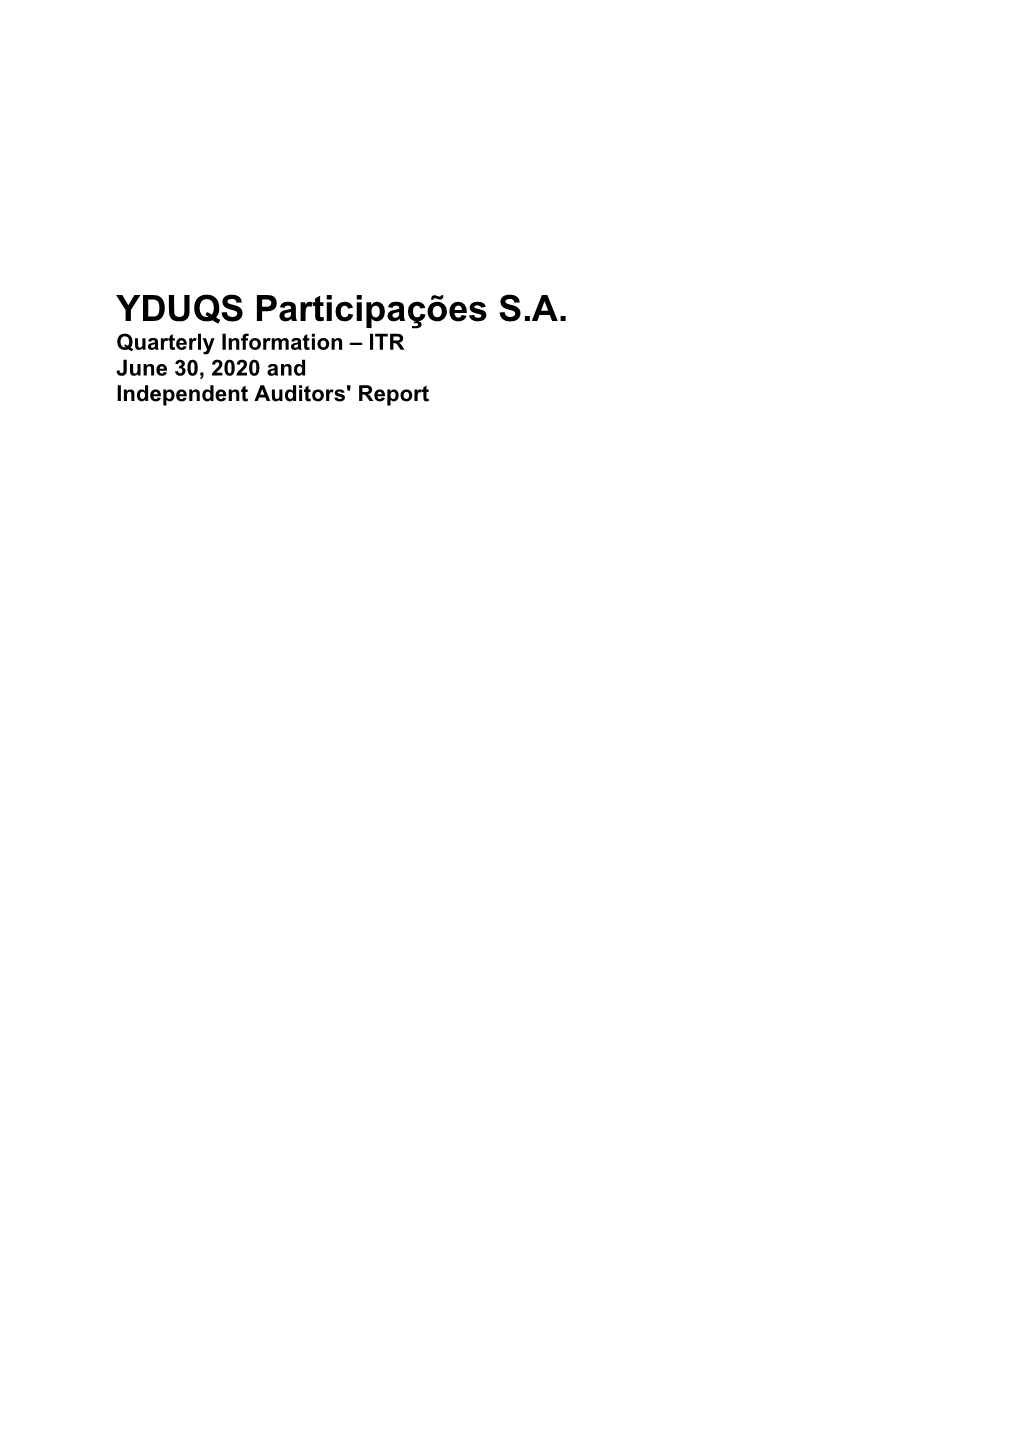 YDUQS Participações S.A. Quarterly Information – ITR June 30, 2020 and Independent Auditors' Report